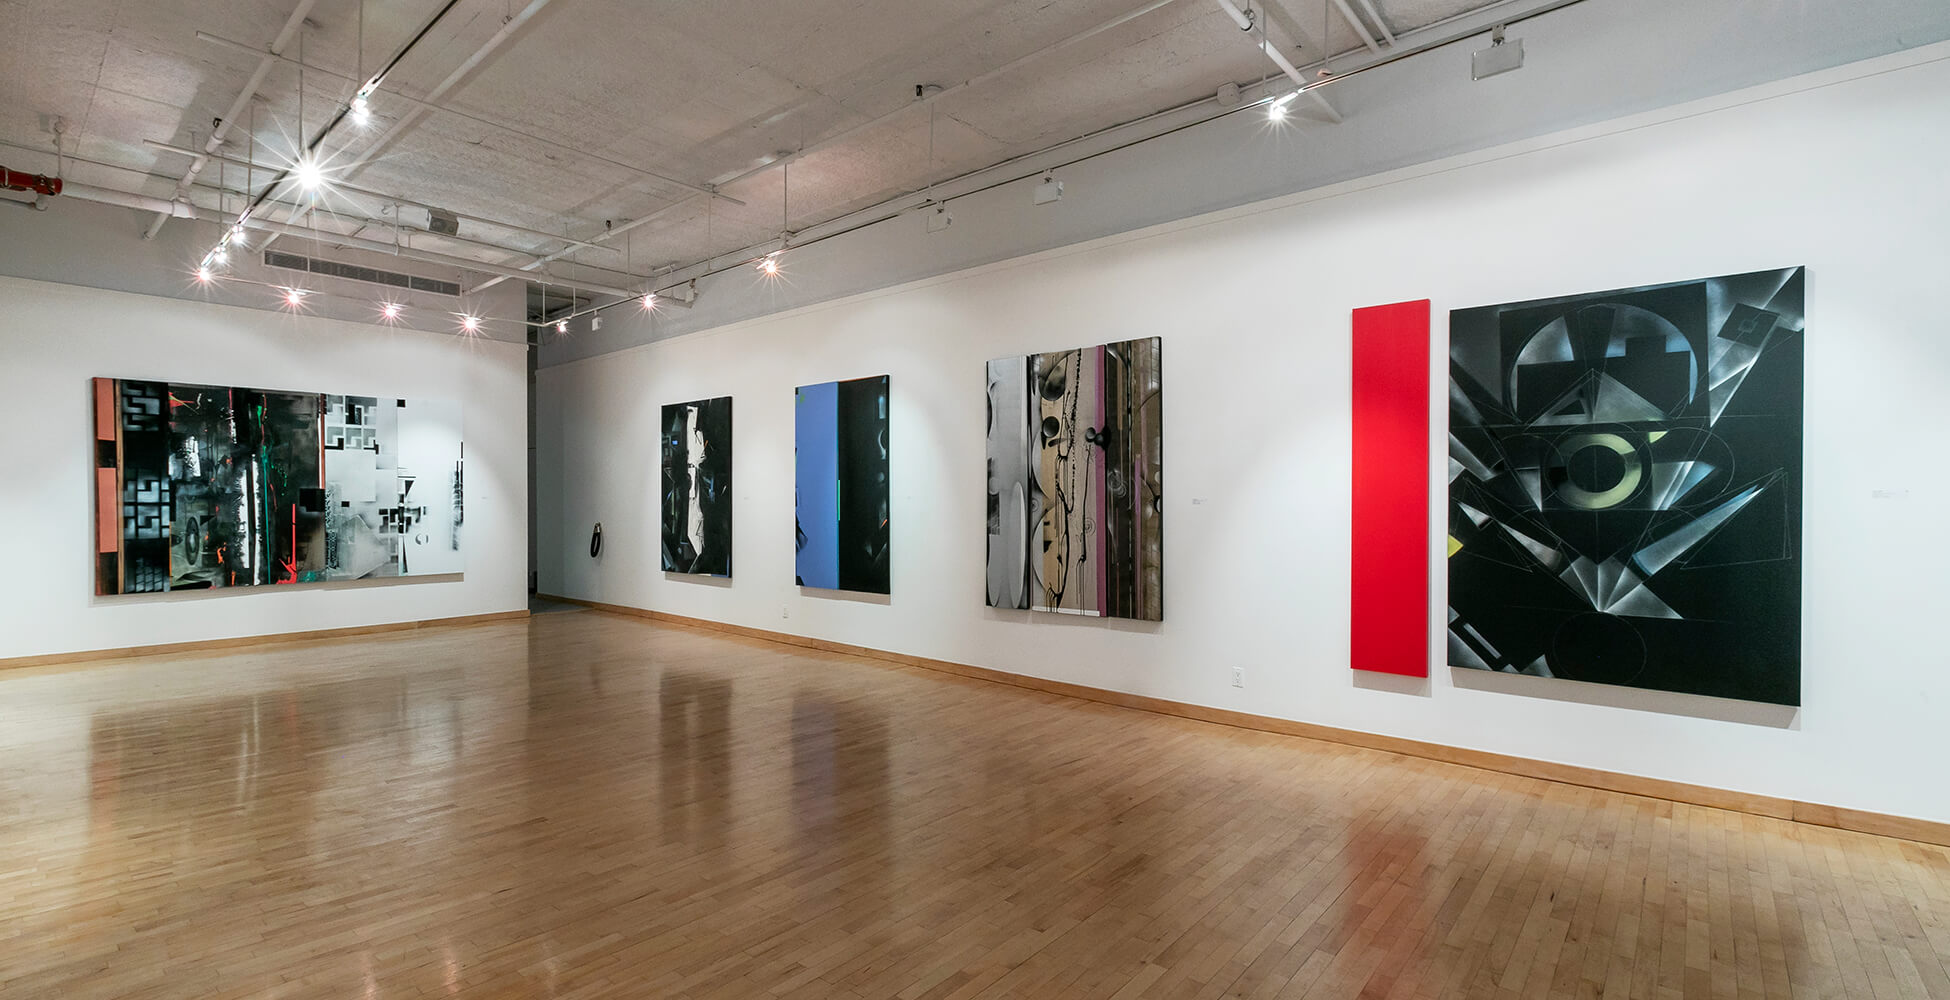 Installation View #1 of Nola Zirin's recent exhibition entitled 'Assembling Chaos' at June Kelly Gallery, Spring 2022.